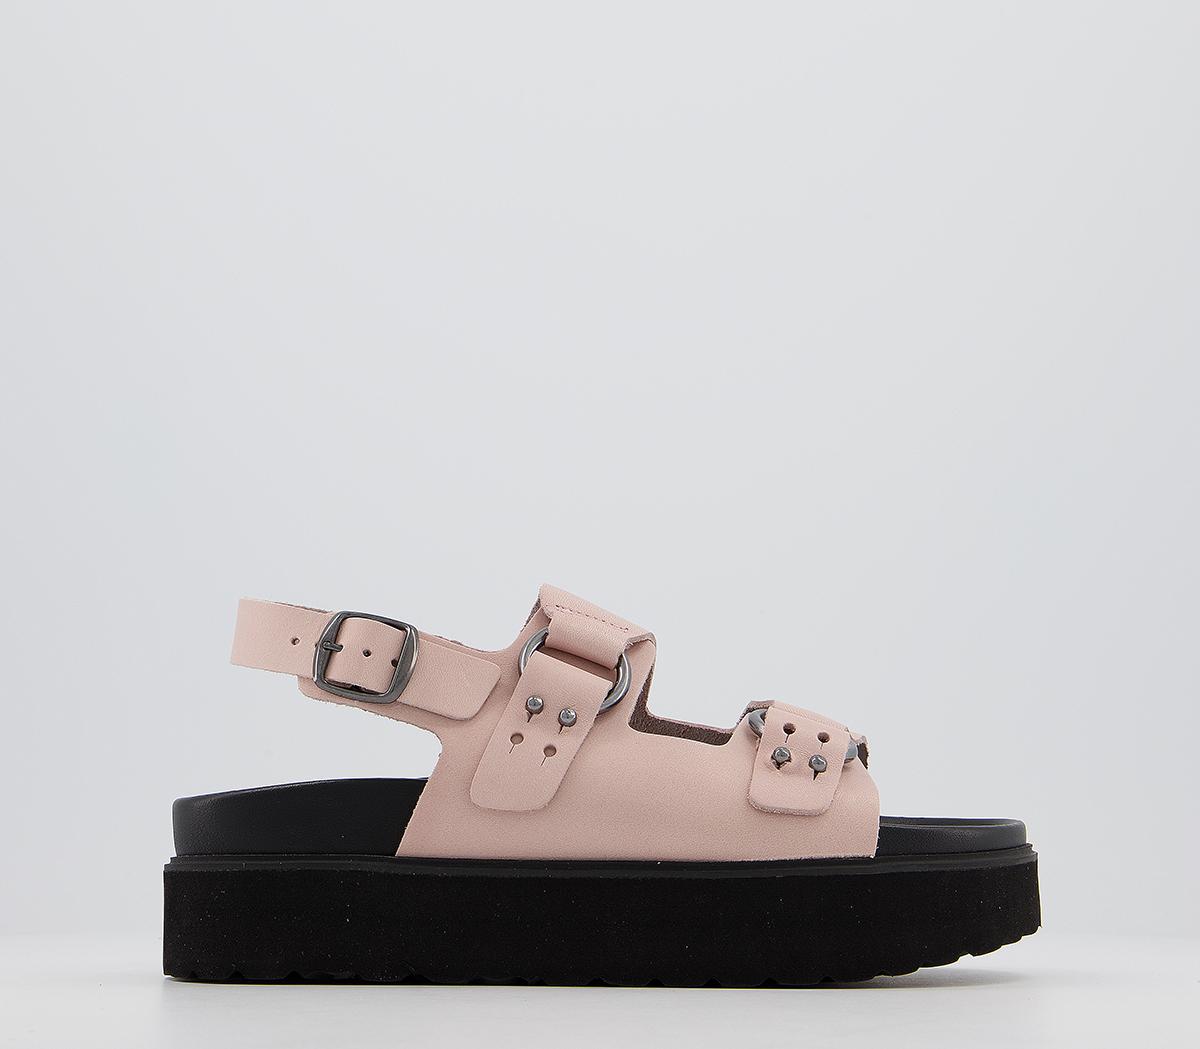 OFFICEMicha Ring Reef Footbed SandalsPink Leather